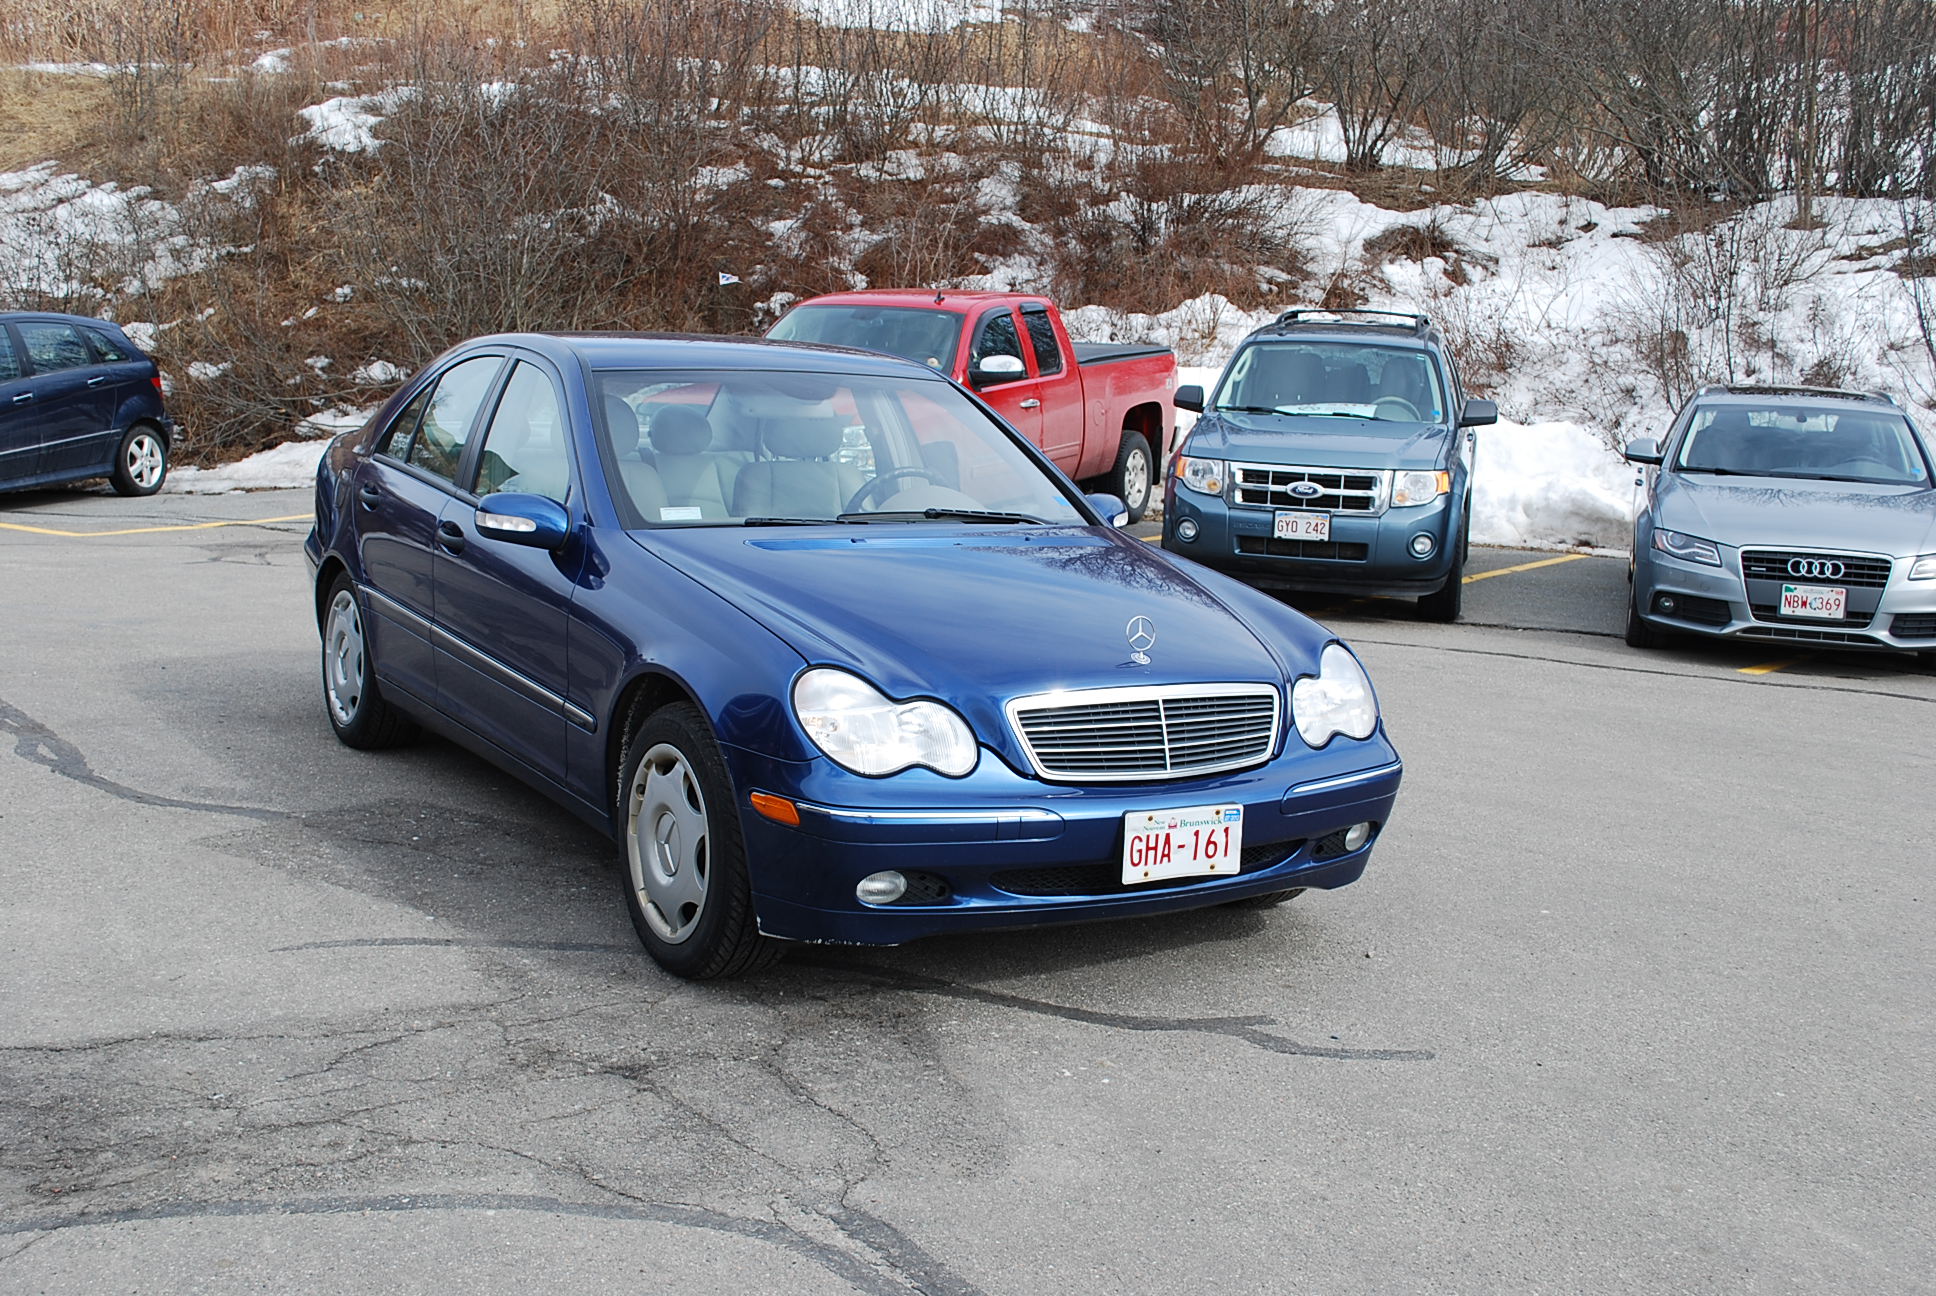 Used 2004 MercedesBenz C240 4Matic SOLD for sale in